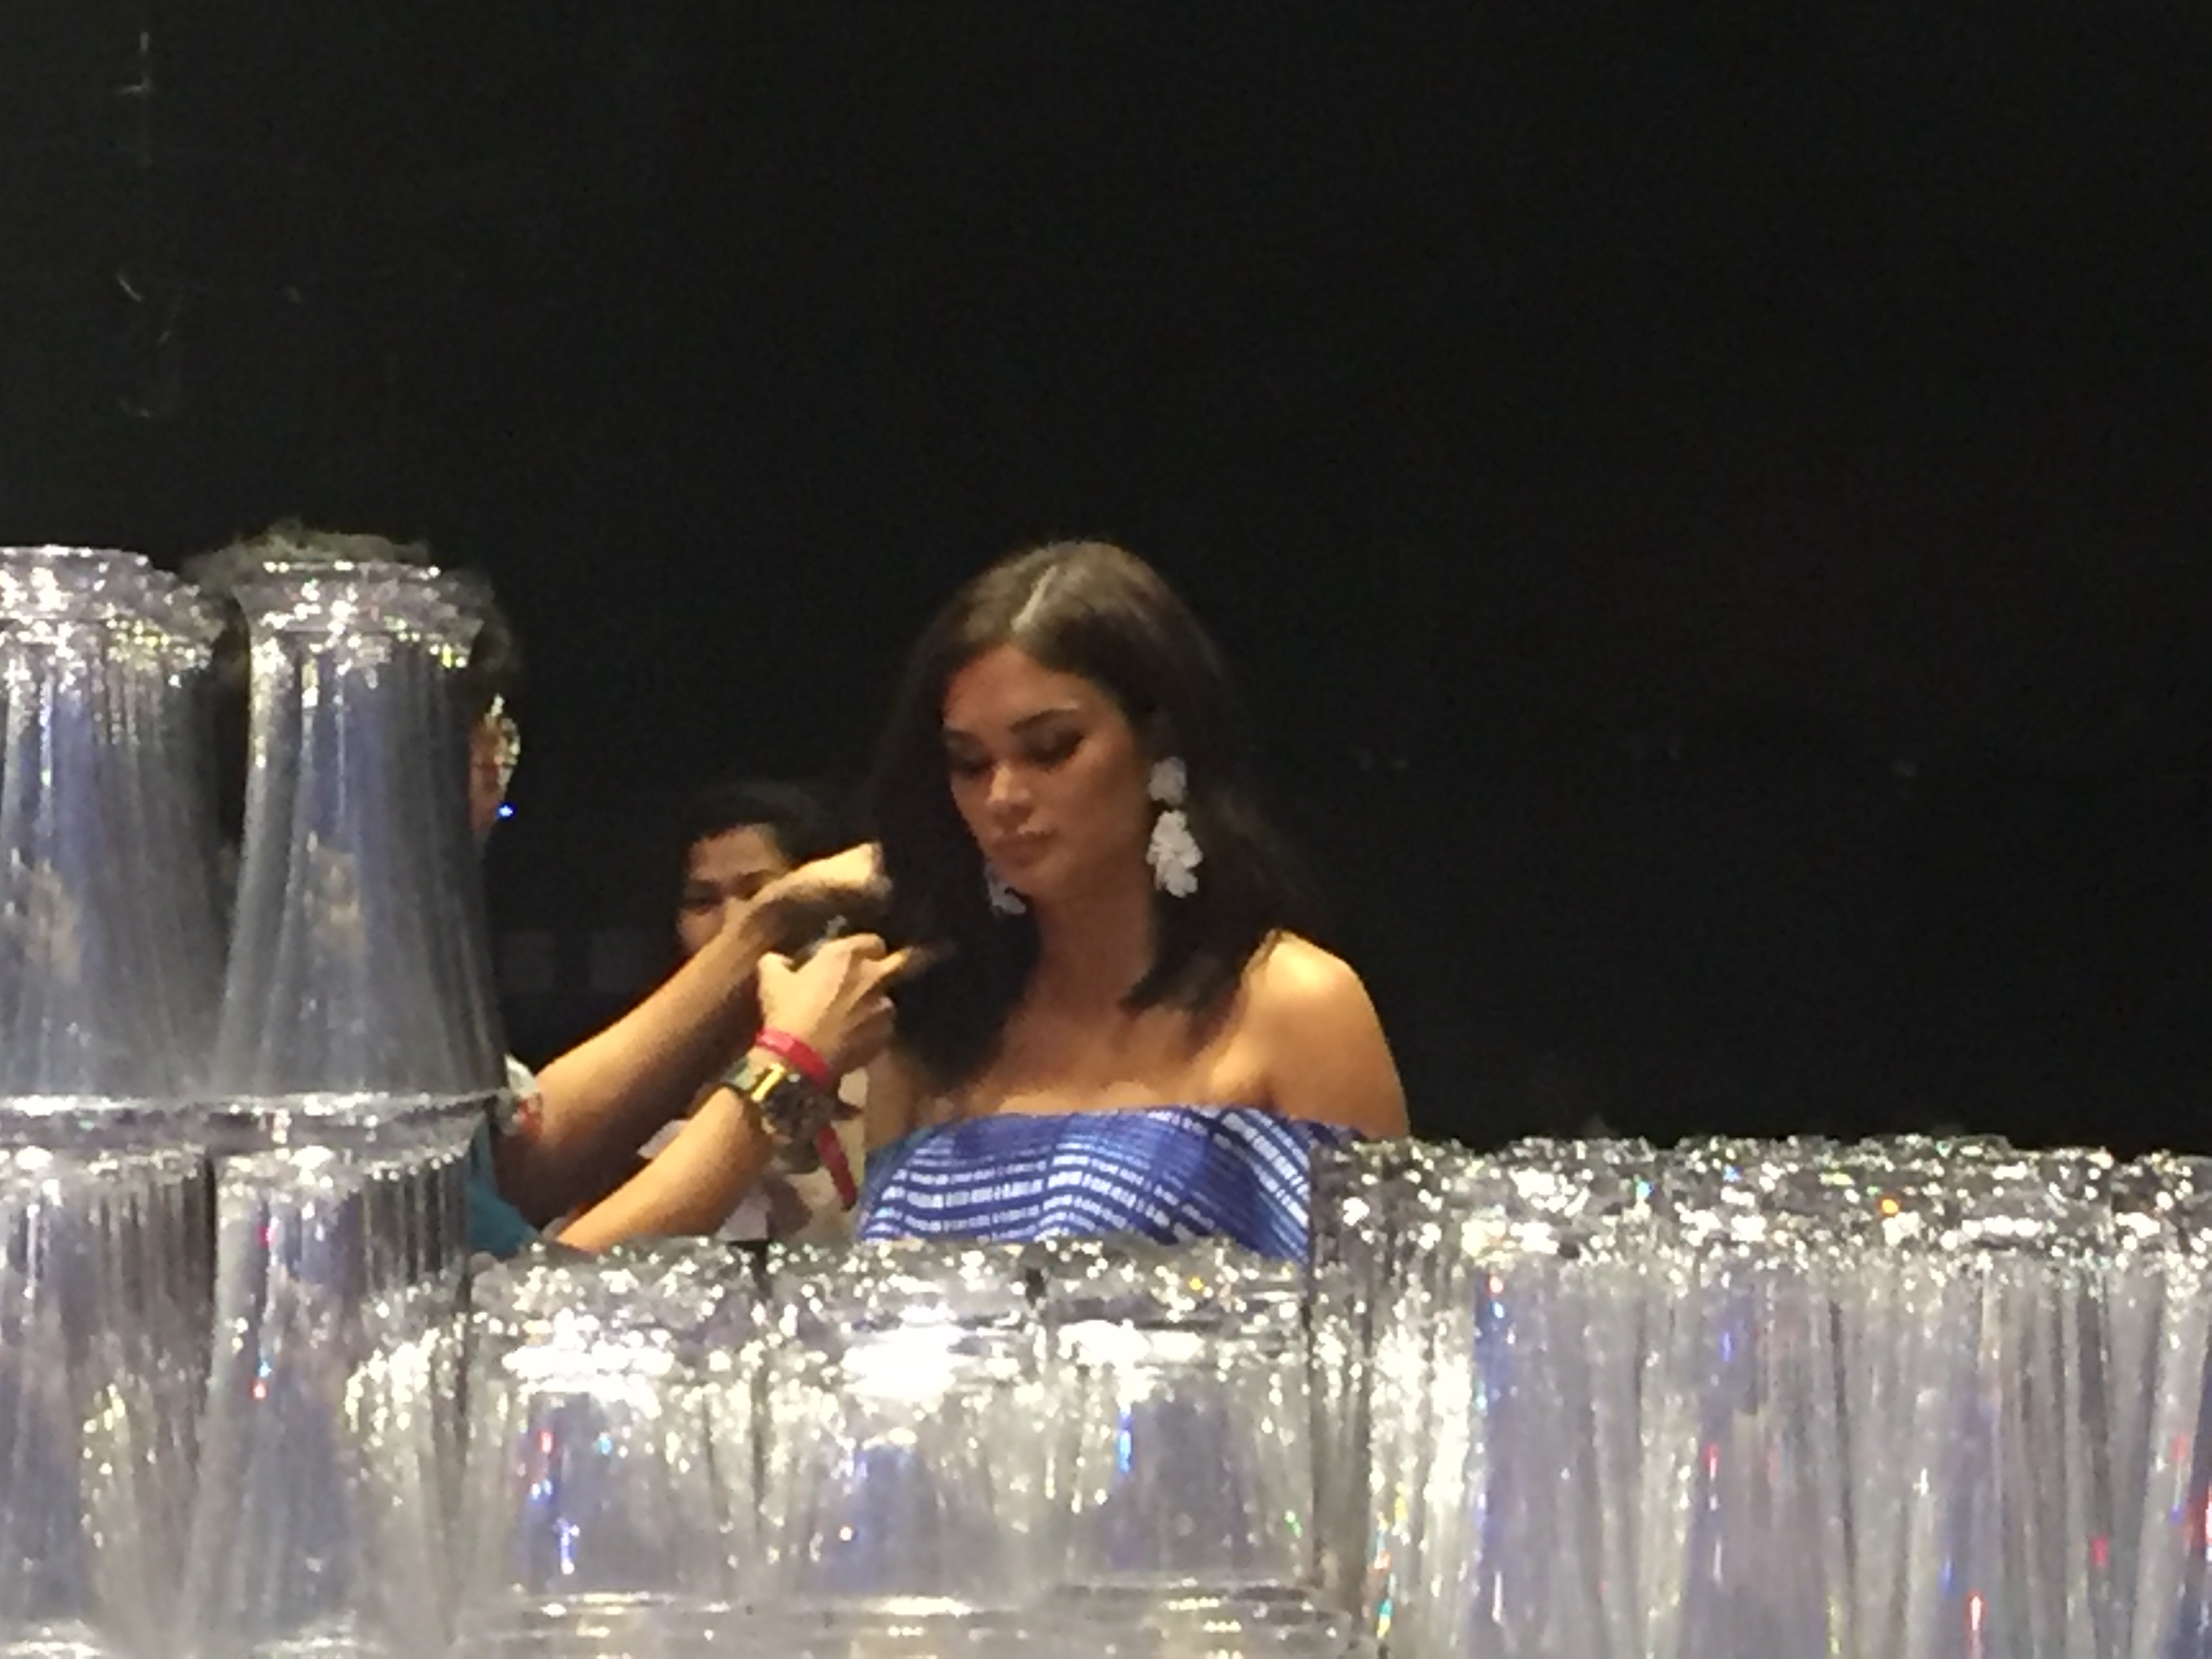 Pia Wurtzbach while preparing for the next activity. I was able to capture photos and videos at the bar.